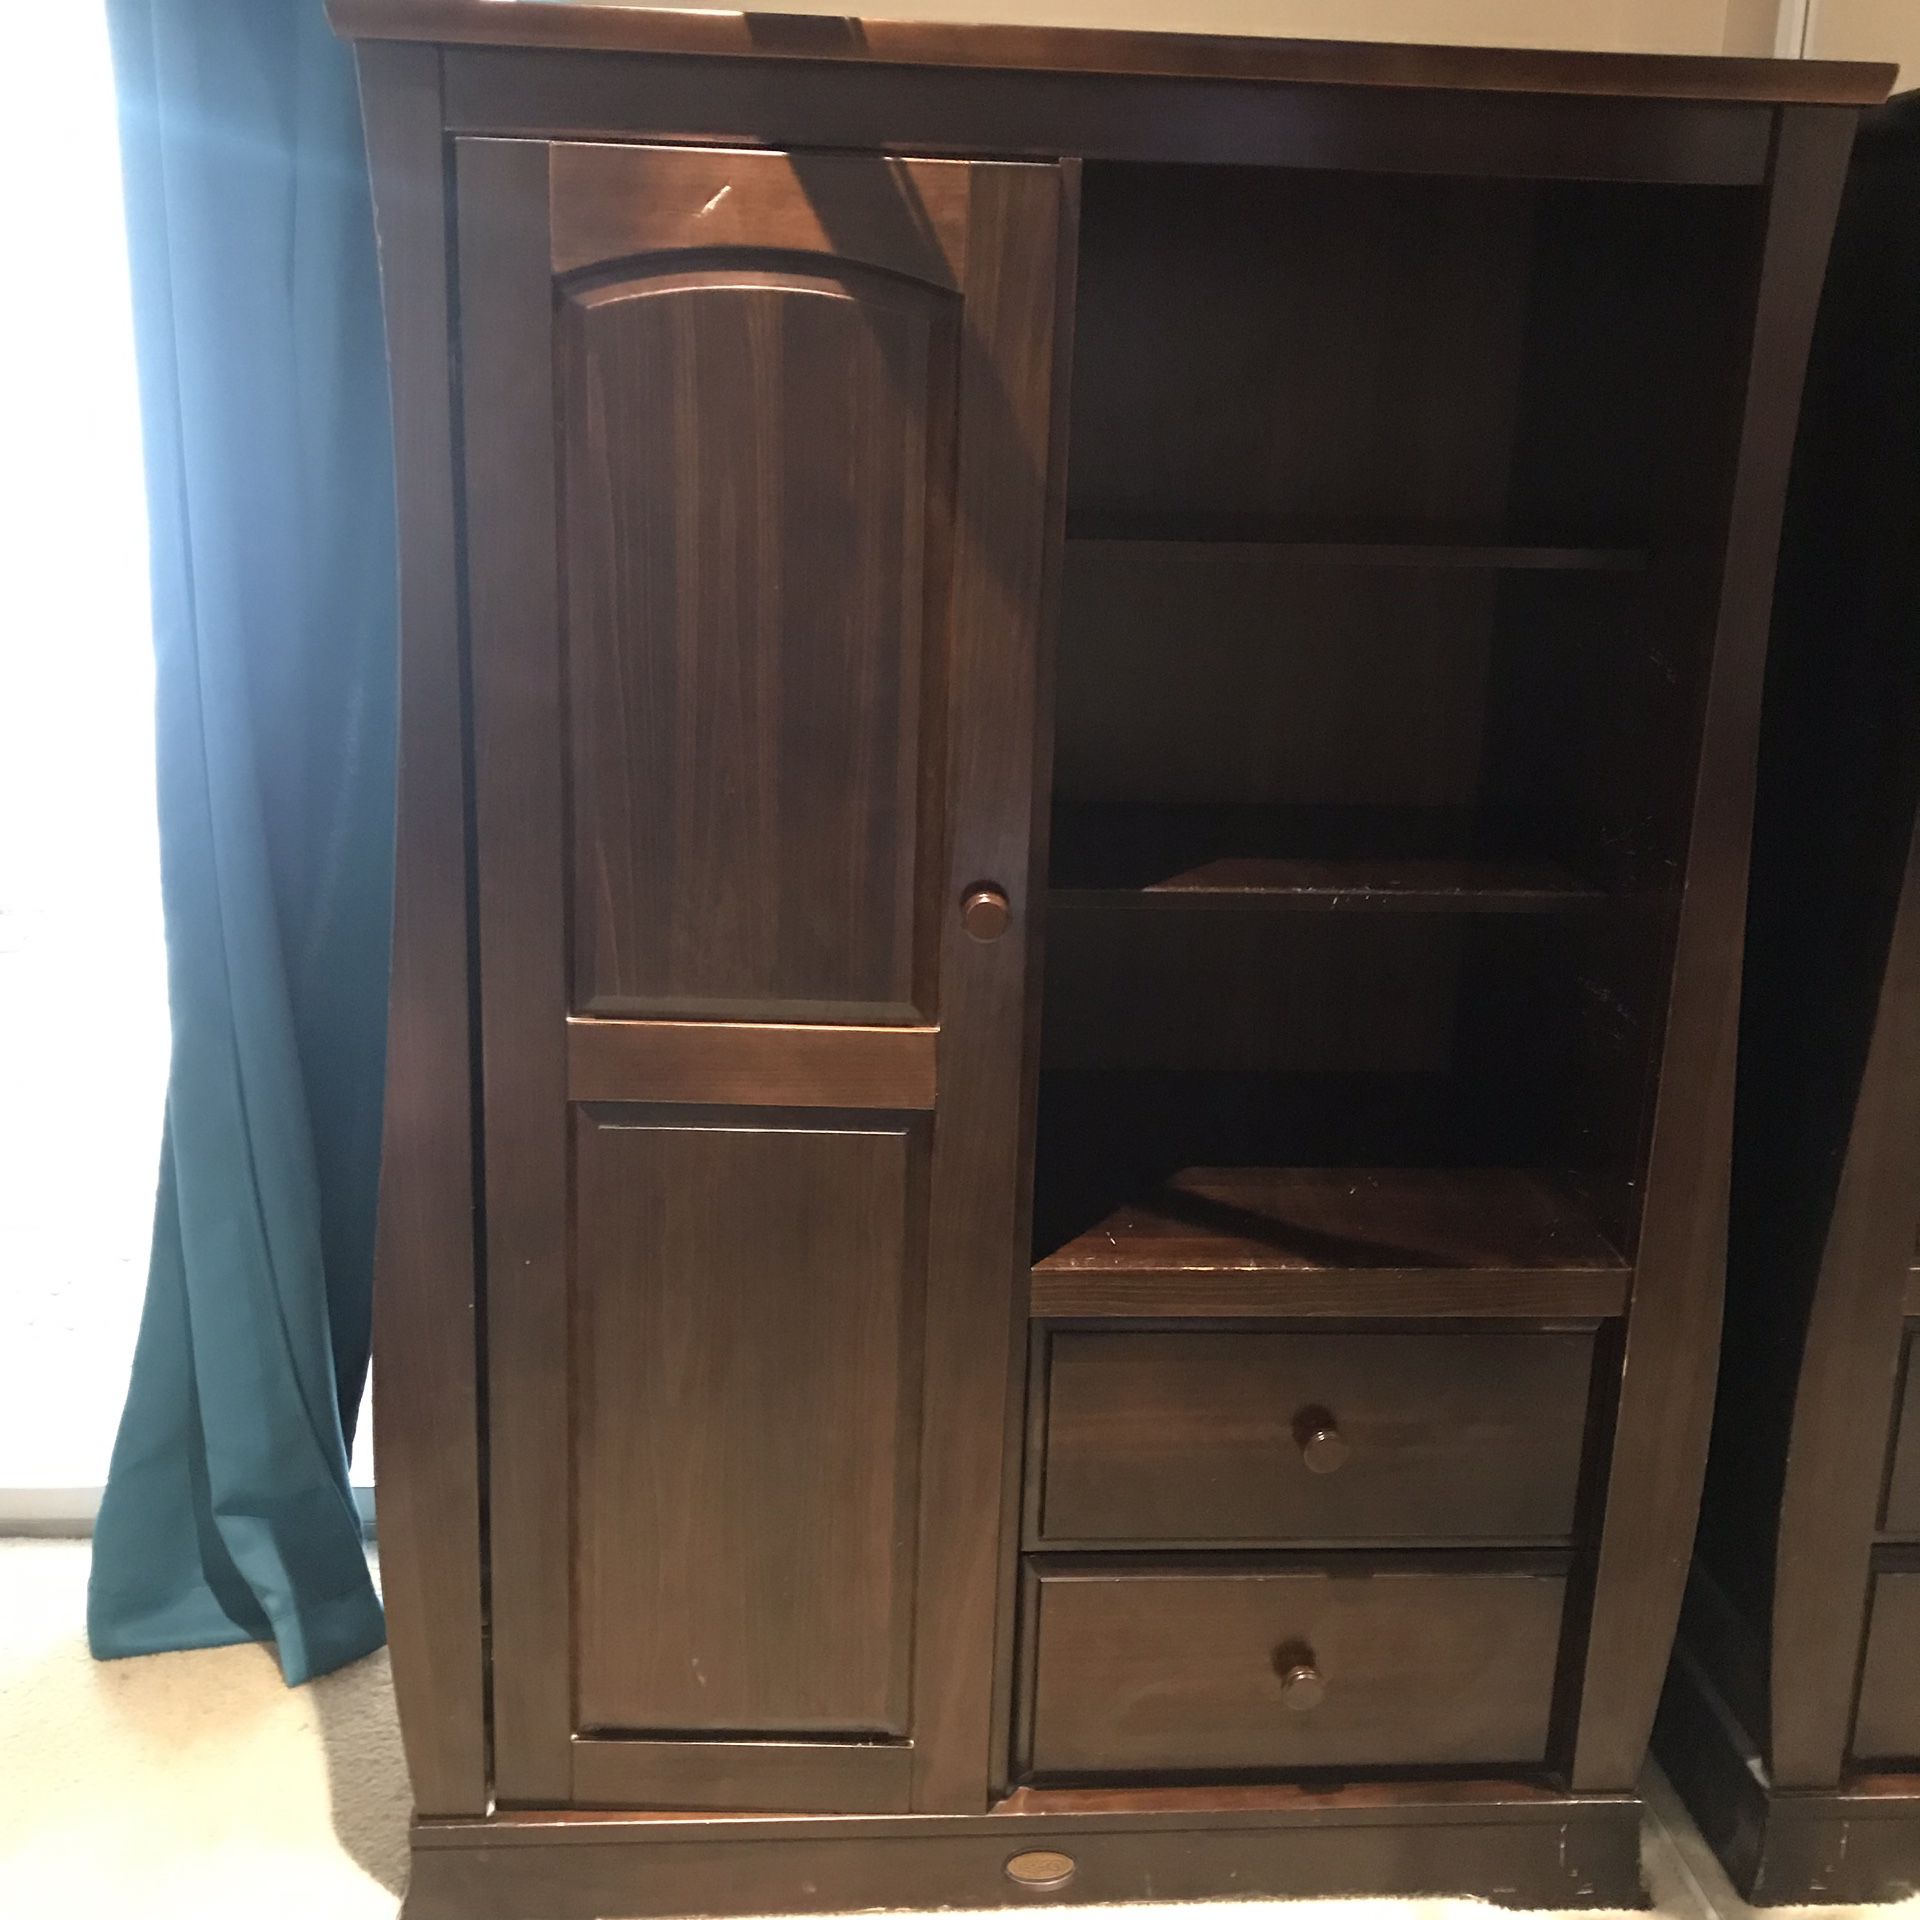 Baby cabinet and closet$100